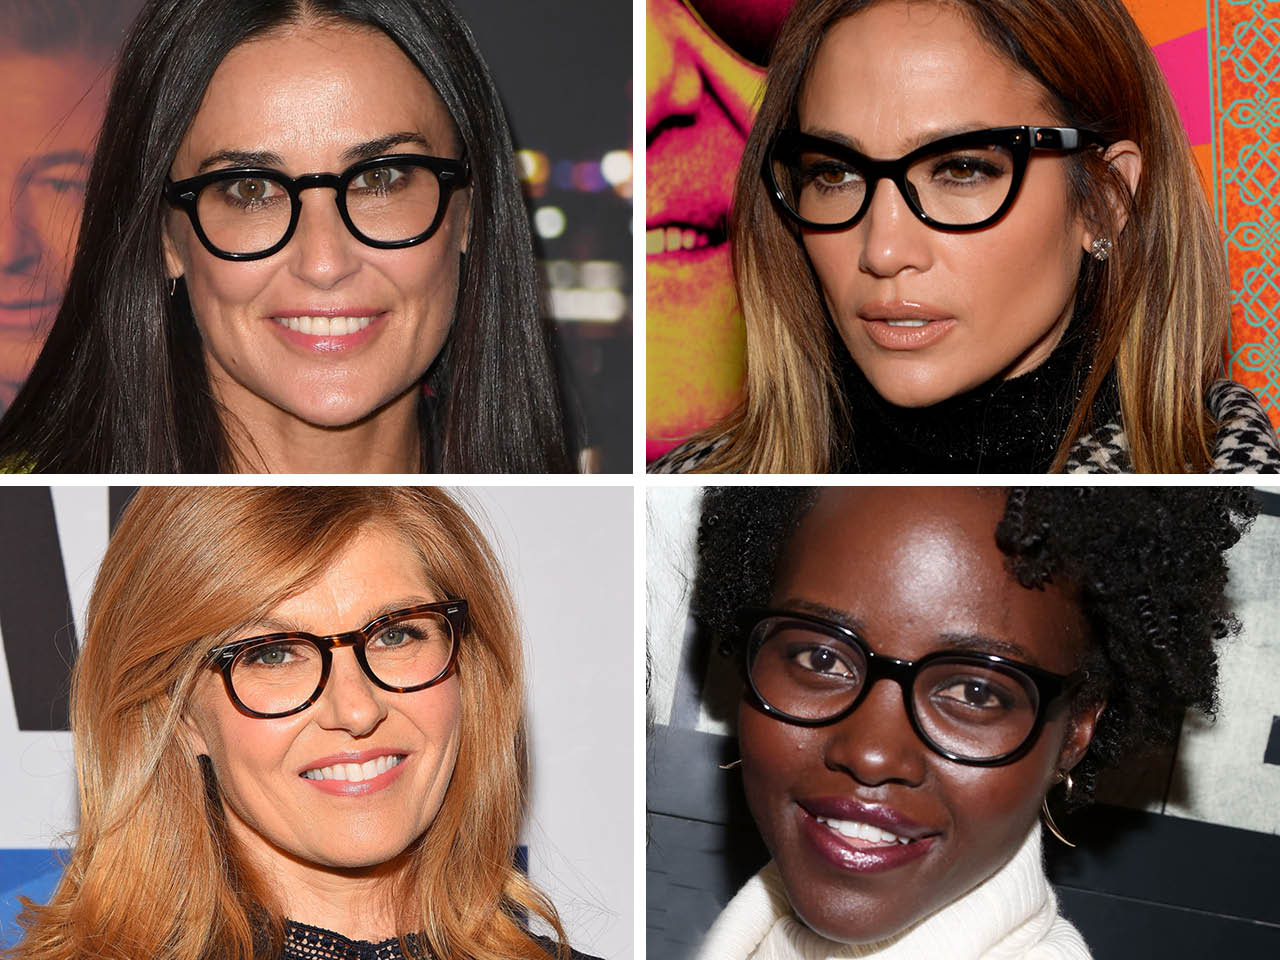 How To Buy The Right Eyeglasses Based On Your Face Shape